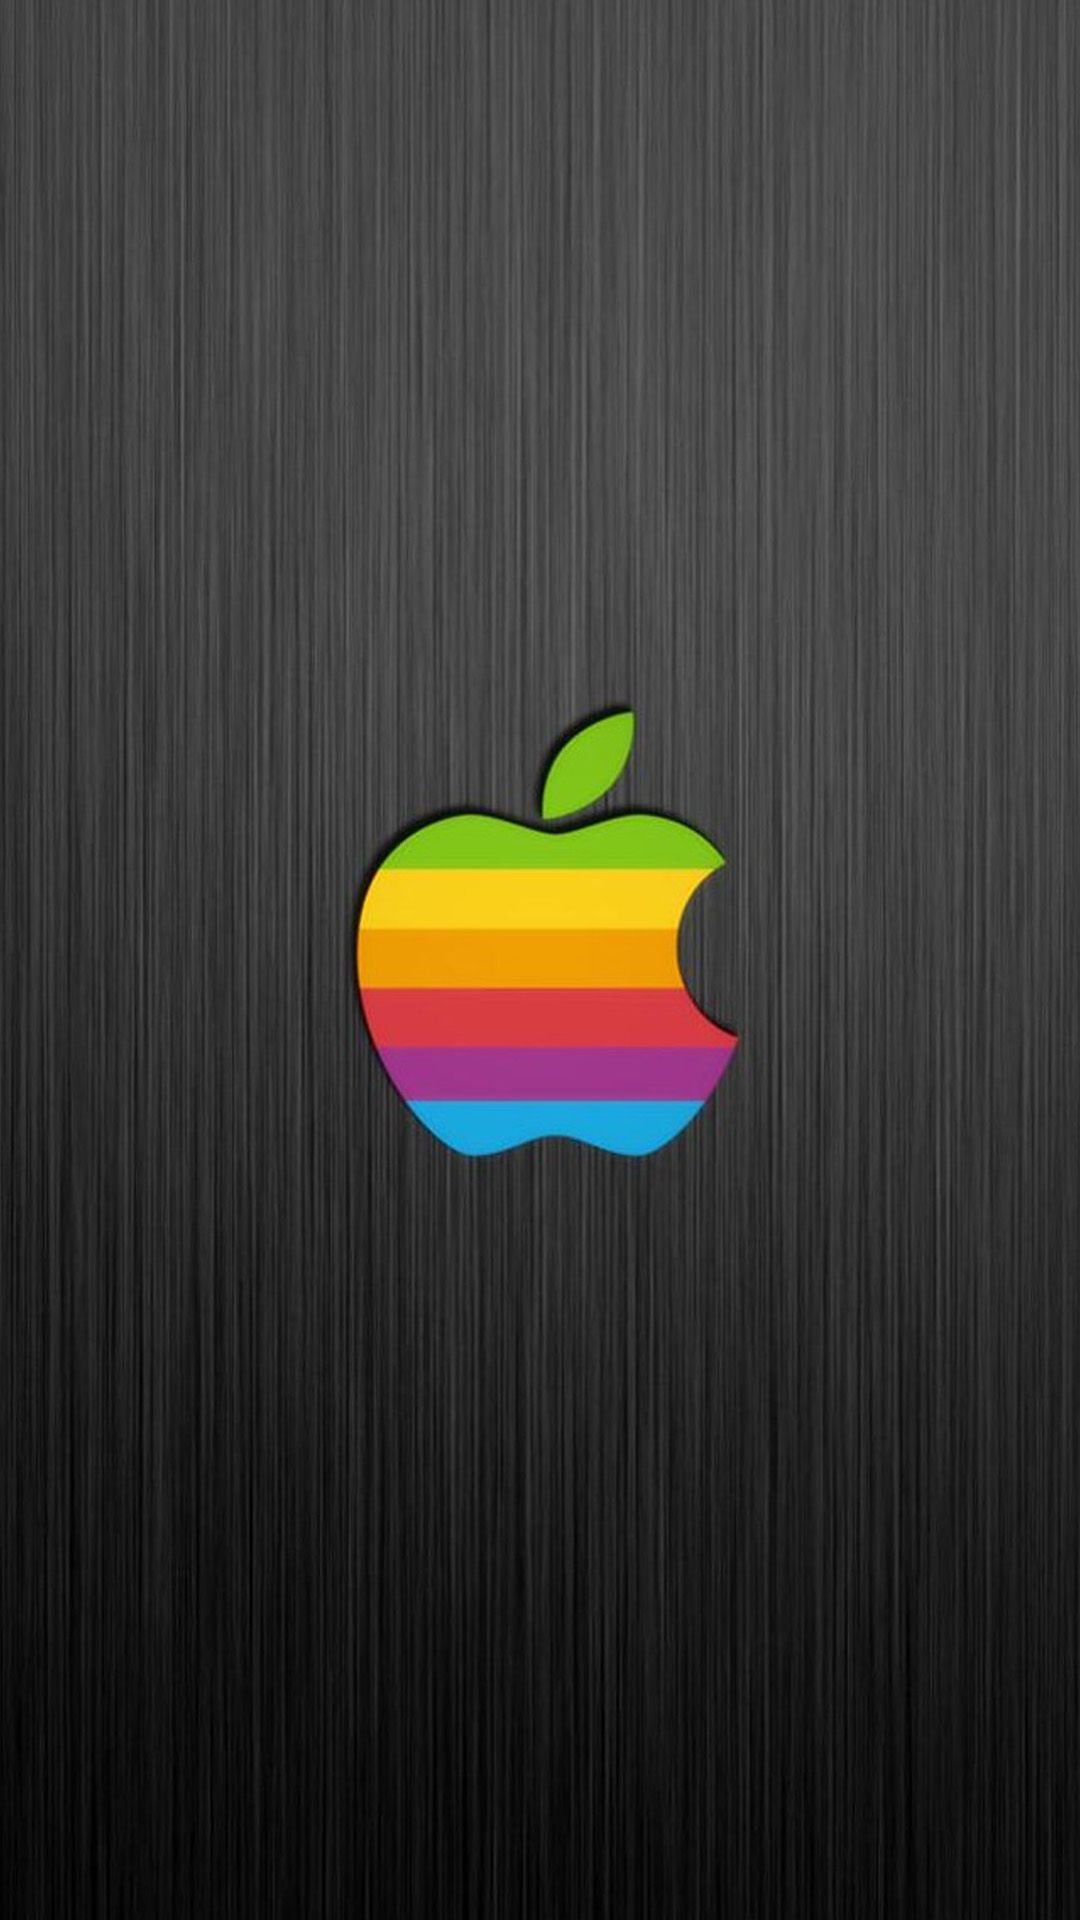 Colorful Apple Logo Wallpaper Free Colorful Apple Logo Background